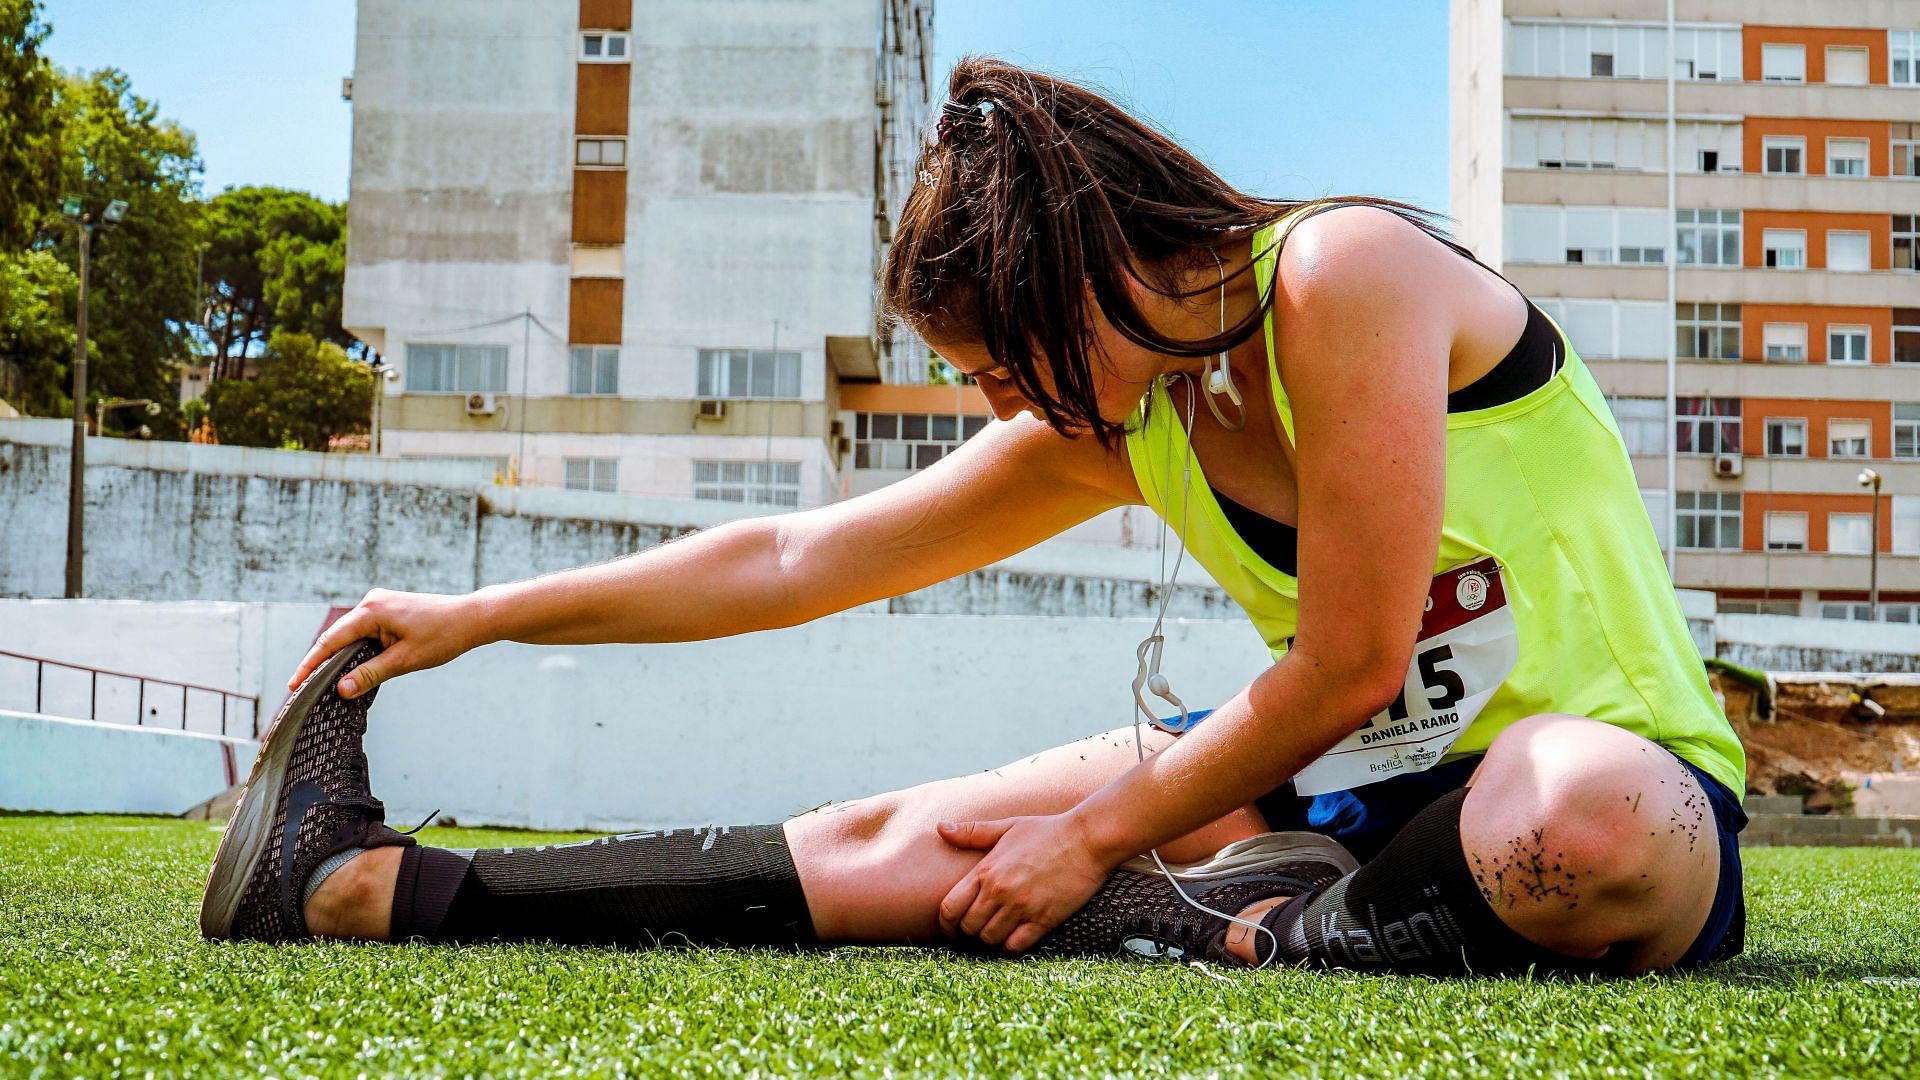 Cool-down exercises should be an essential part of the workout routine. (Image via Pexels/Run ffwpu)